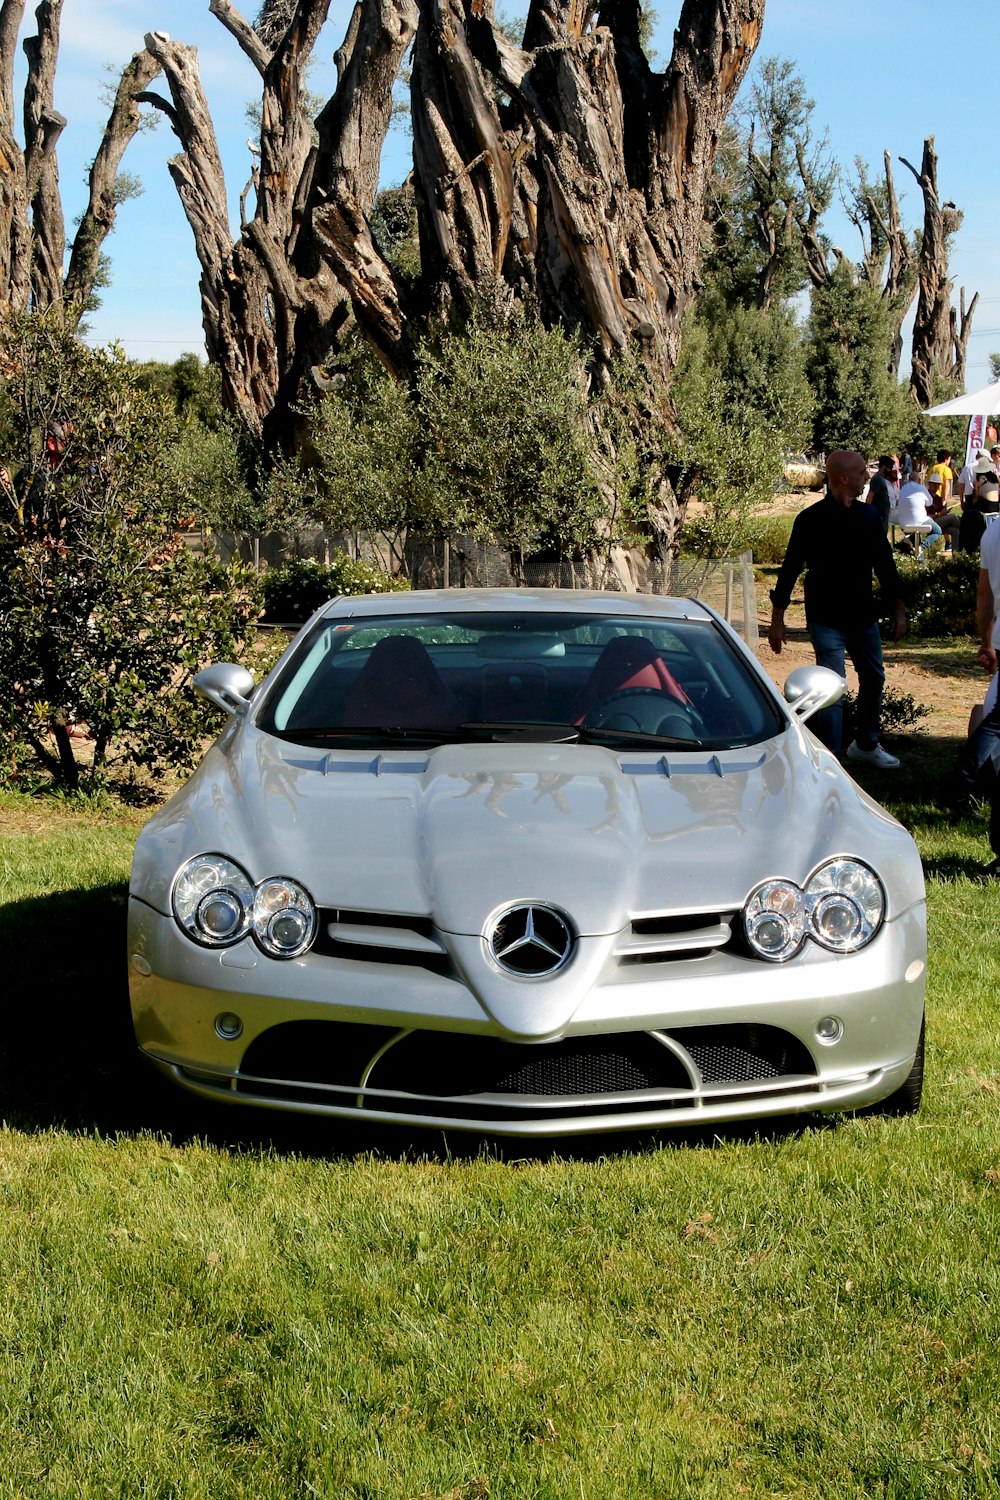 a silver sports car parked in the grass